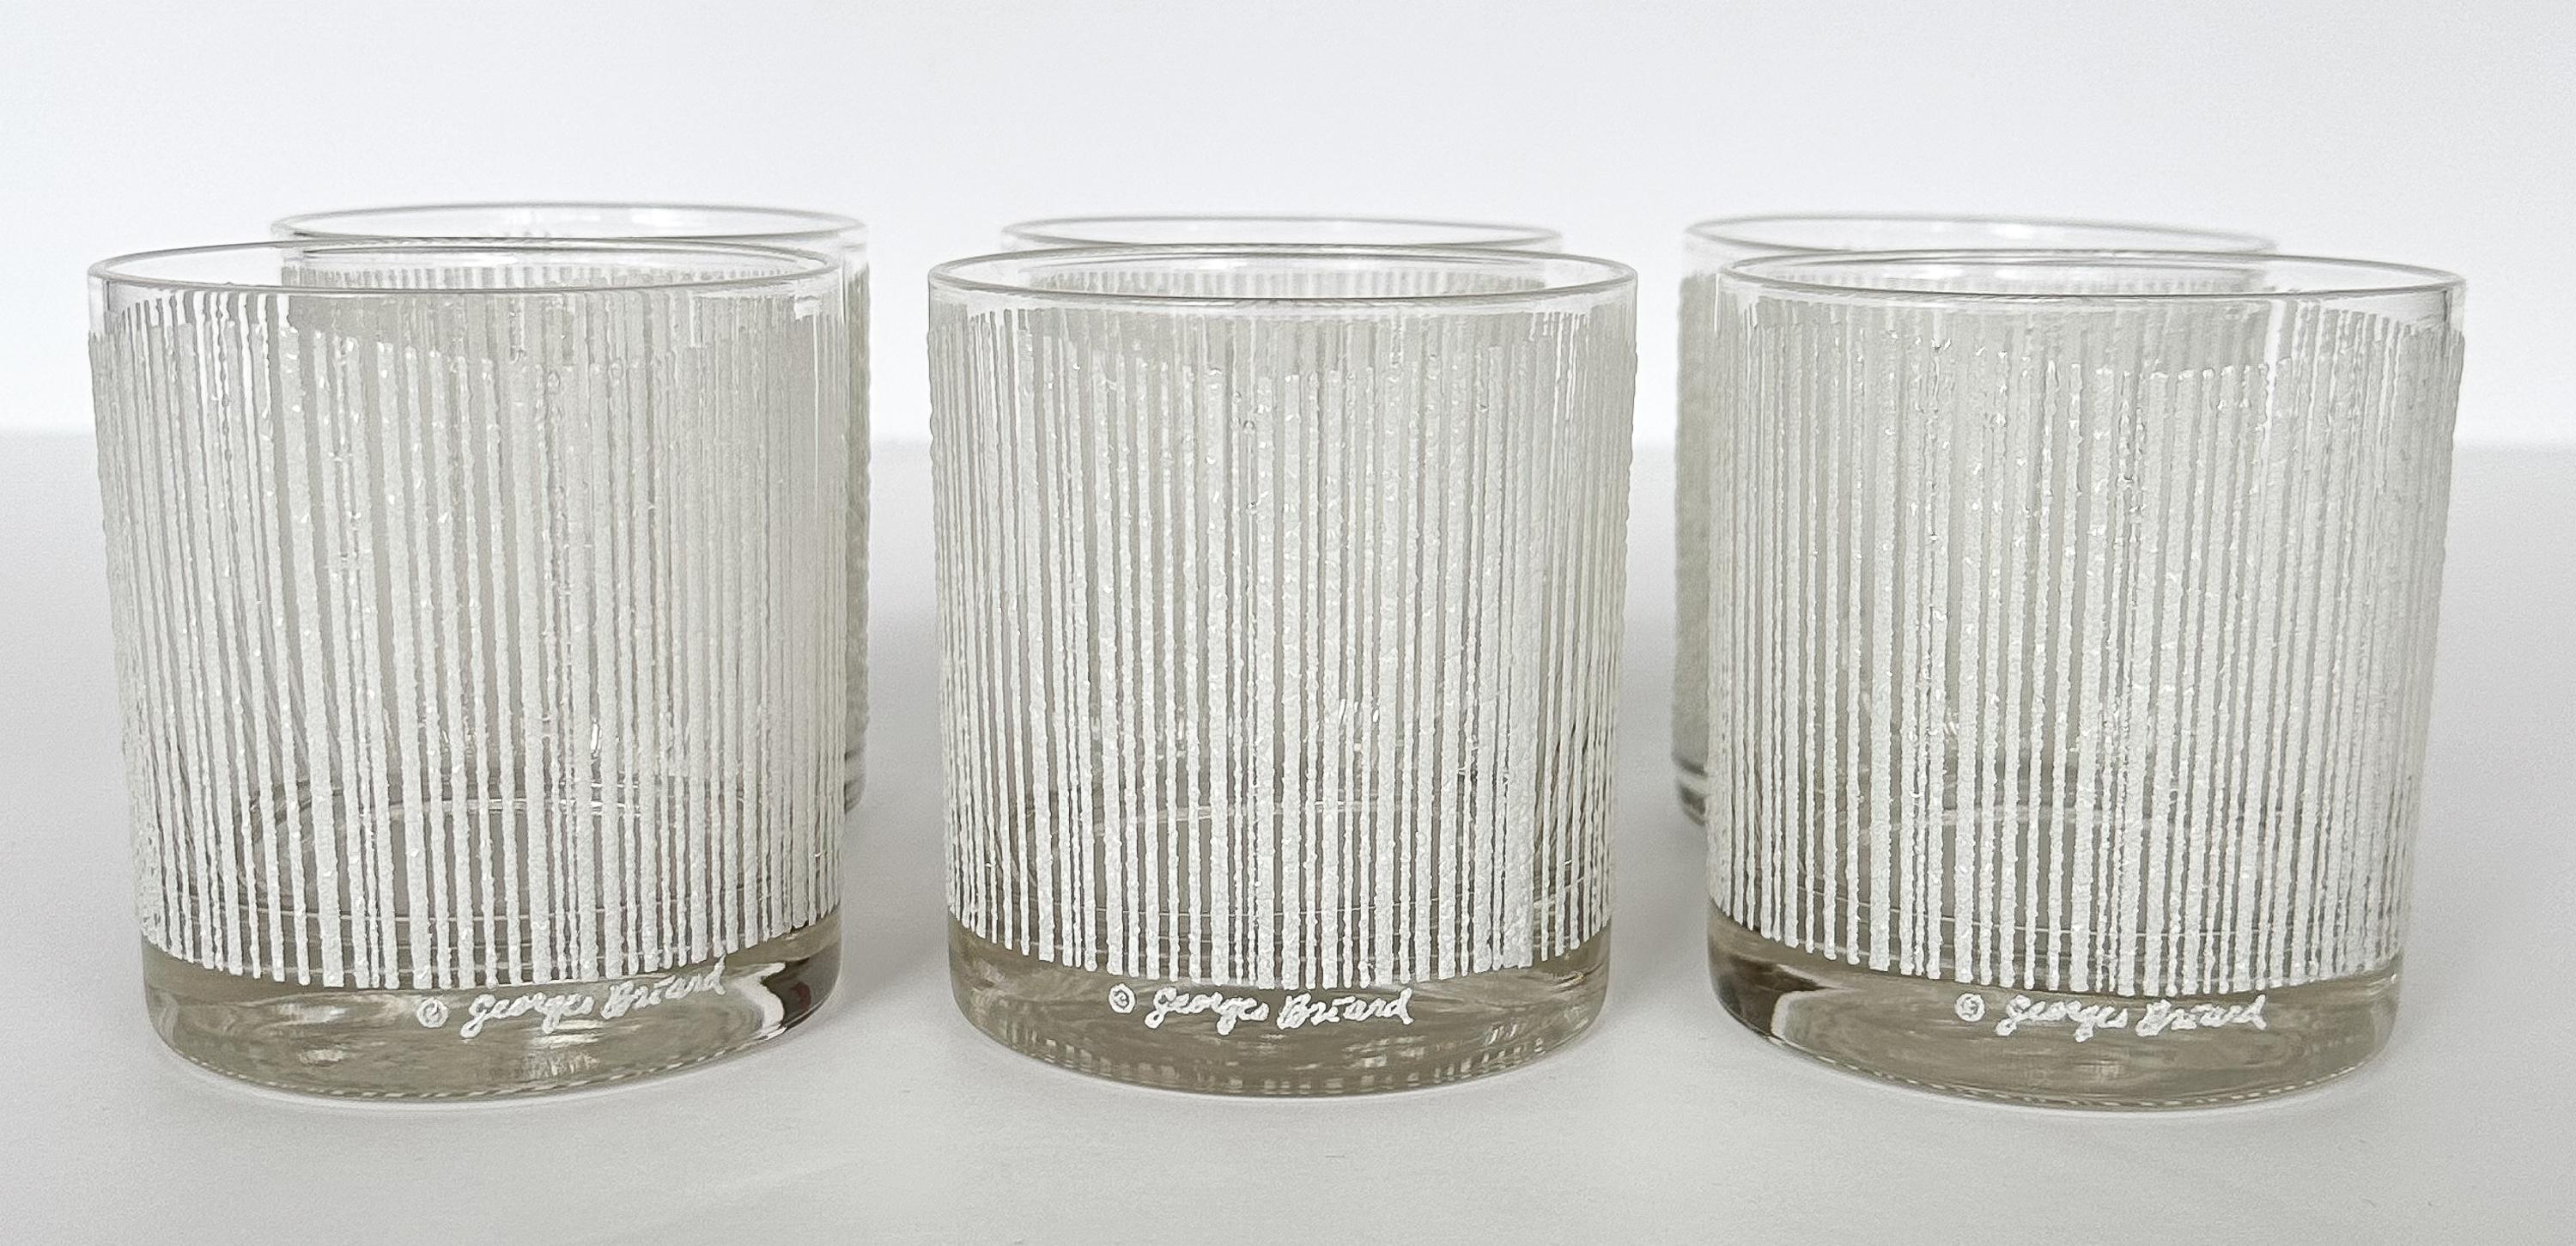 Discover the epitome of cocktail sophistication with this set of six mid-century modern Georges Briard “icicle” pattern rocks / old fashioned glasses in white. The 